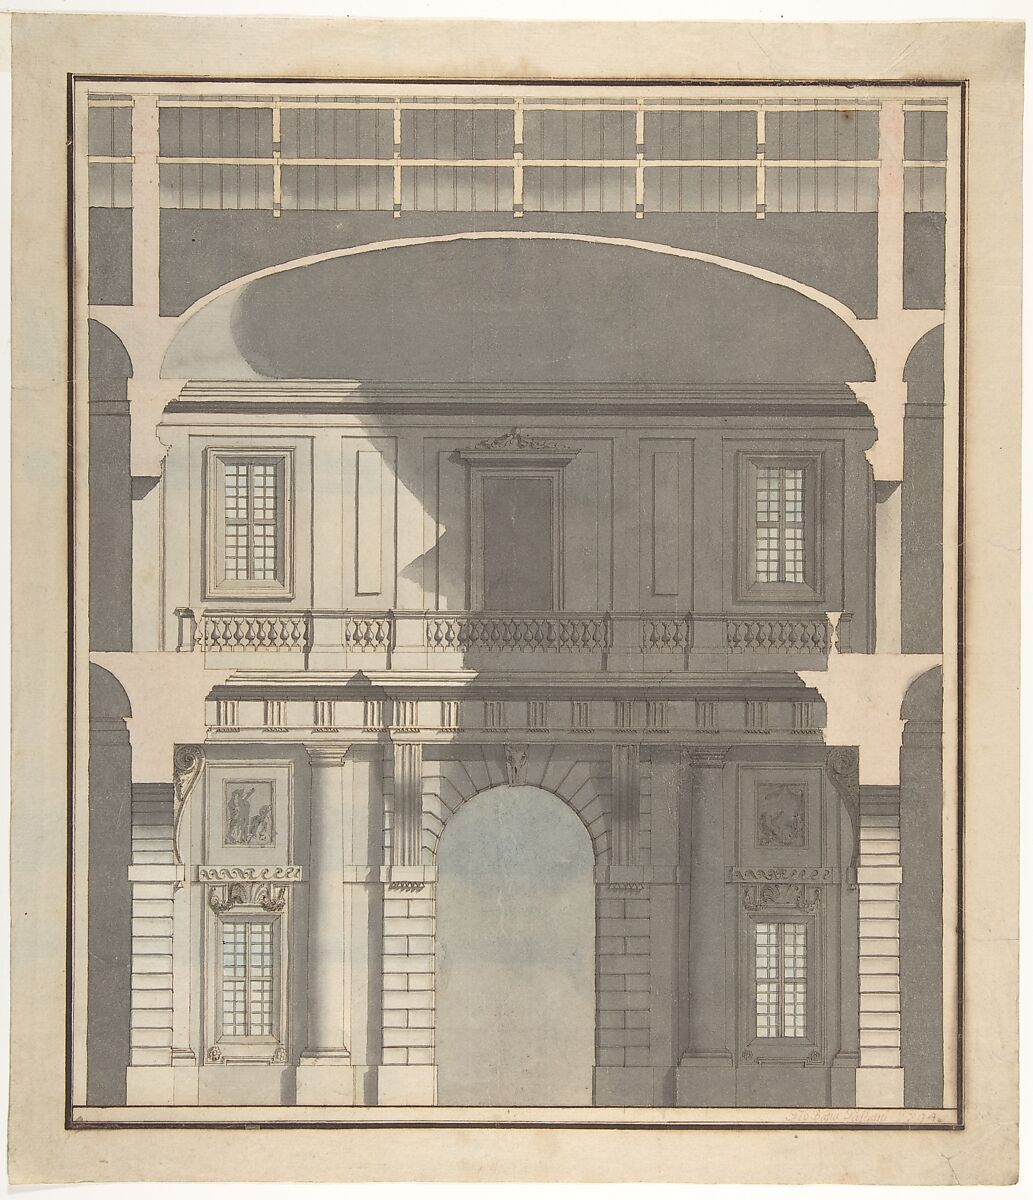 Design for a Stage Set: Design in Section of a Two-Storied Entrance Hall (Recto). Elevation Design for a Monumental Entrance with Columns and Rounded Pediment (Verso)., Giovanni Battista Galliani (Italian, active ca. 1794), Pen and brown ink, brush and gray, pale blue, pink wash over graphite or black chalk. Framing outlines in pen and brown ink. Verso: brush and gray wash over black chalk 